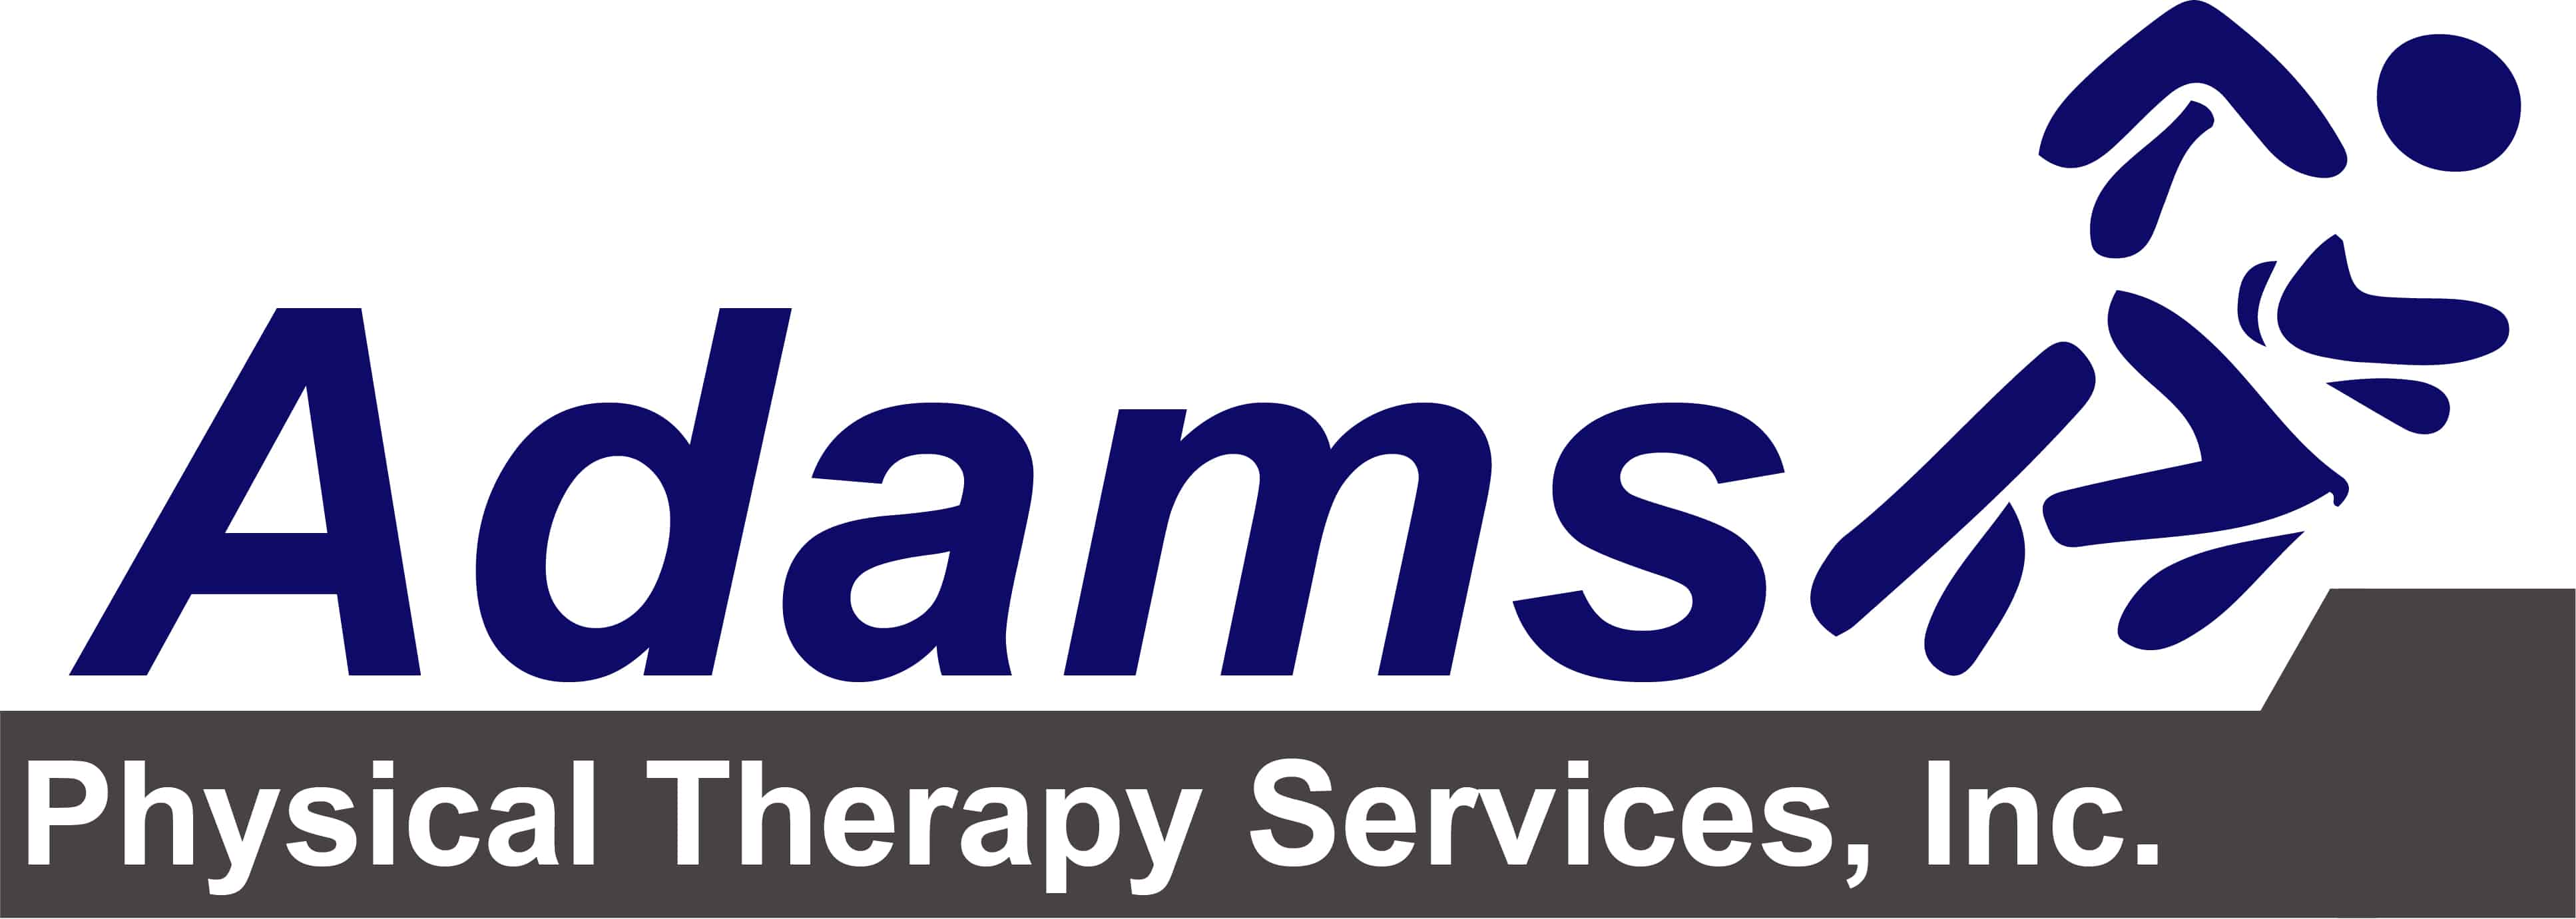 Adams Physical Therapy Services Inc